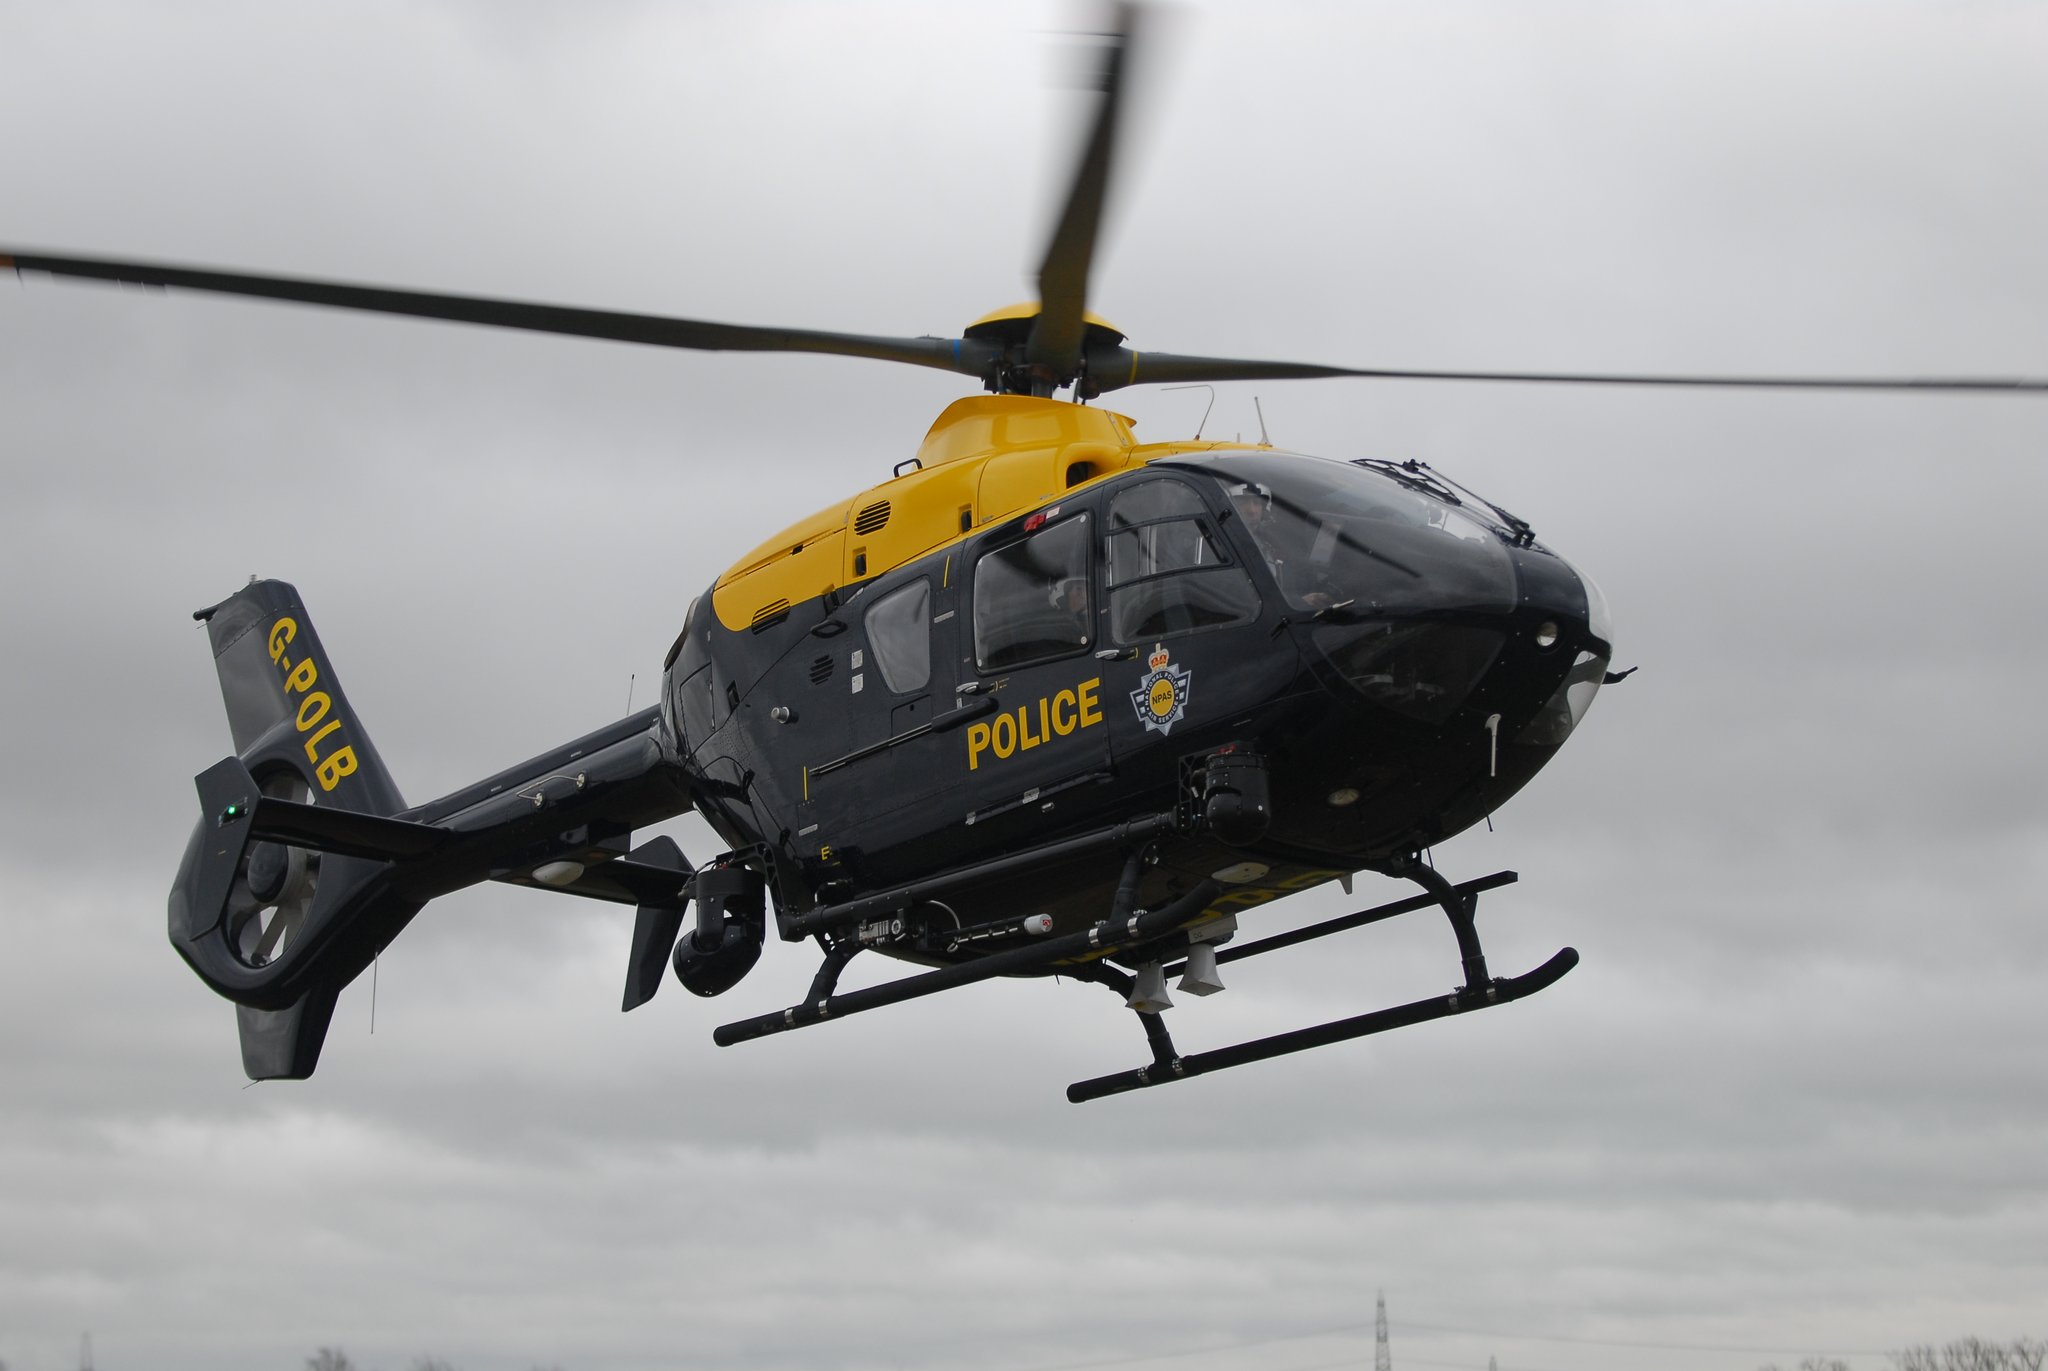 Four arrested after police helicopter involved in M6 car chase